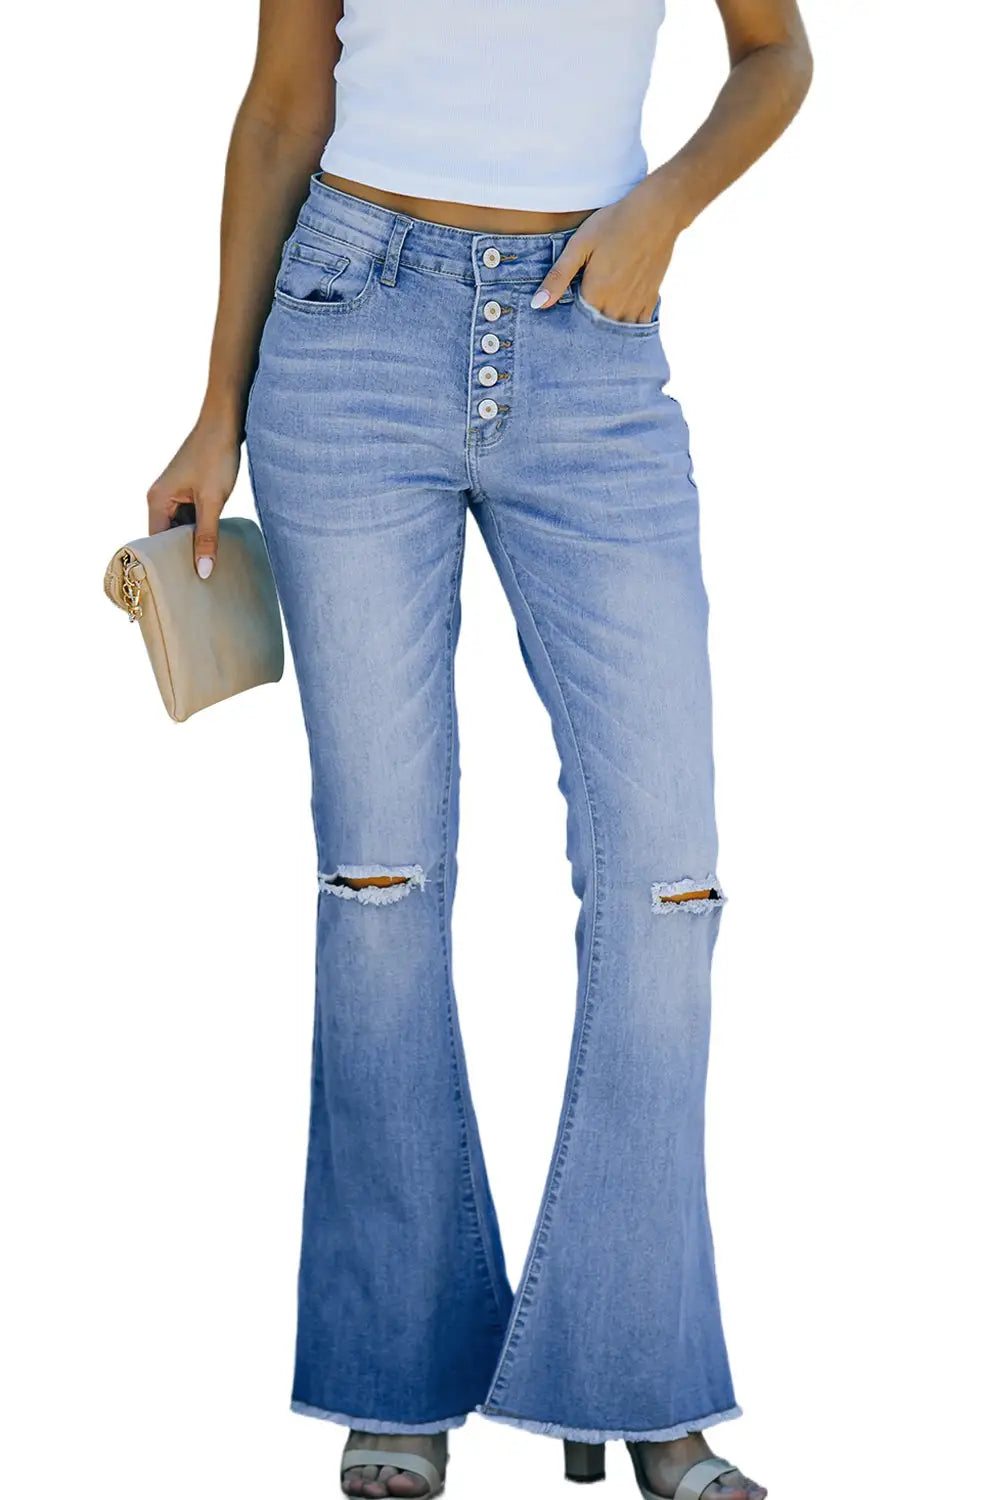 Sky blue high rise distressed bell bottom denims - jeans